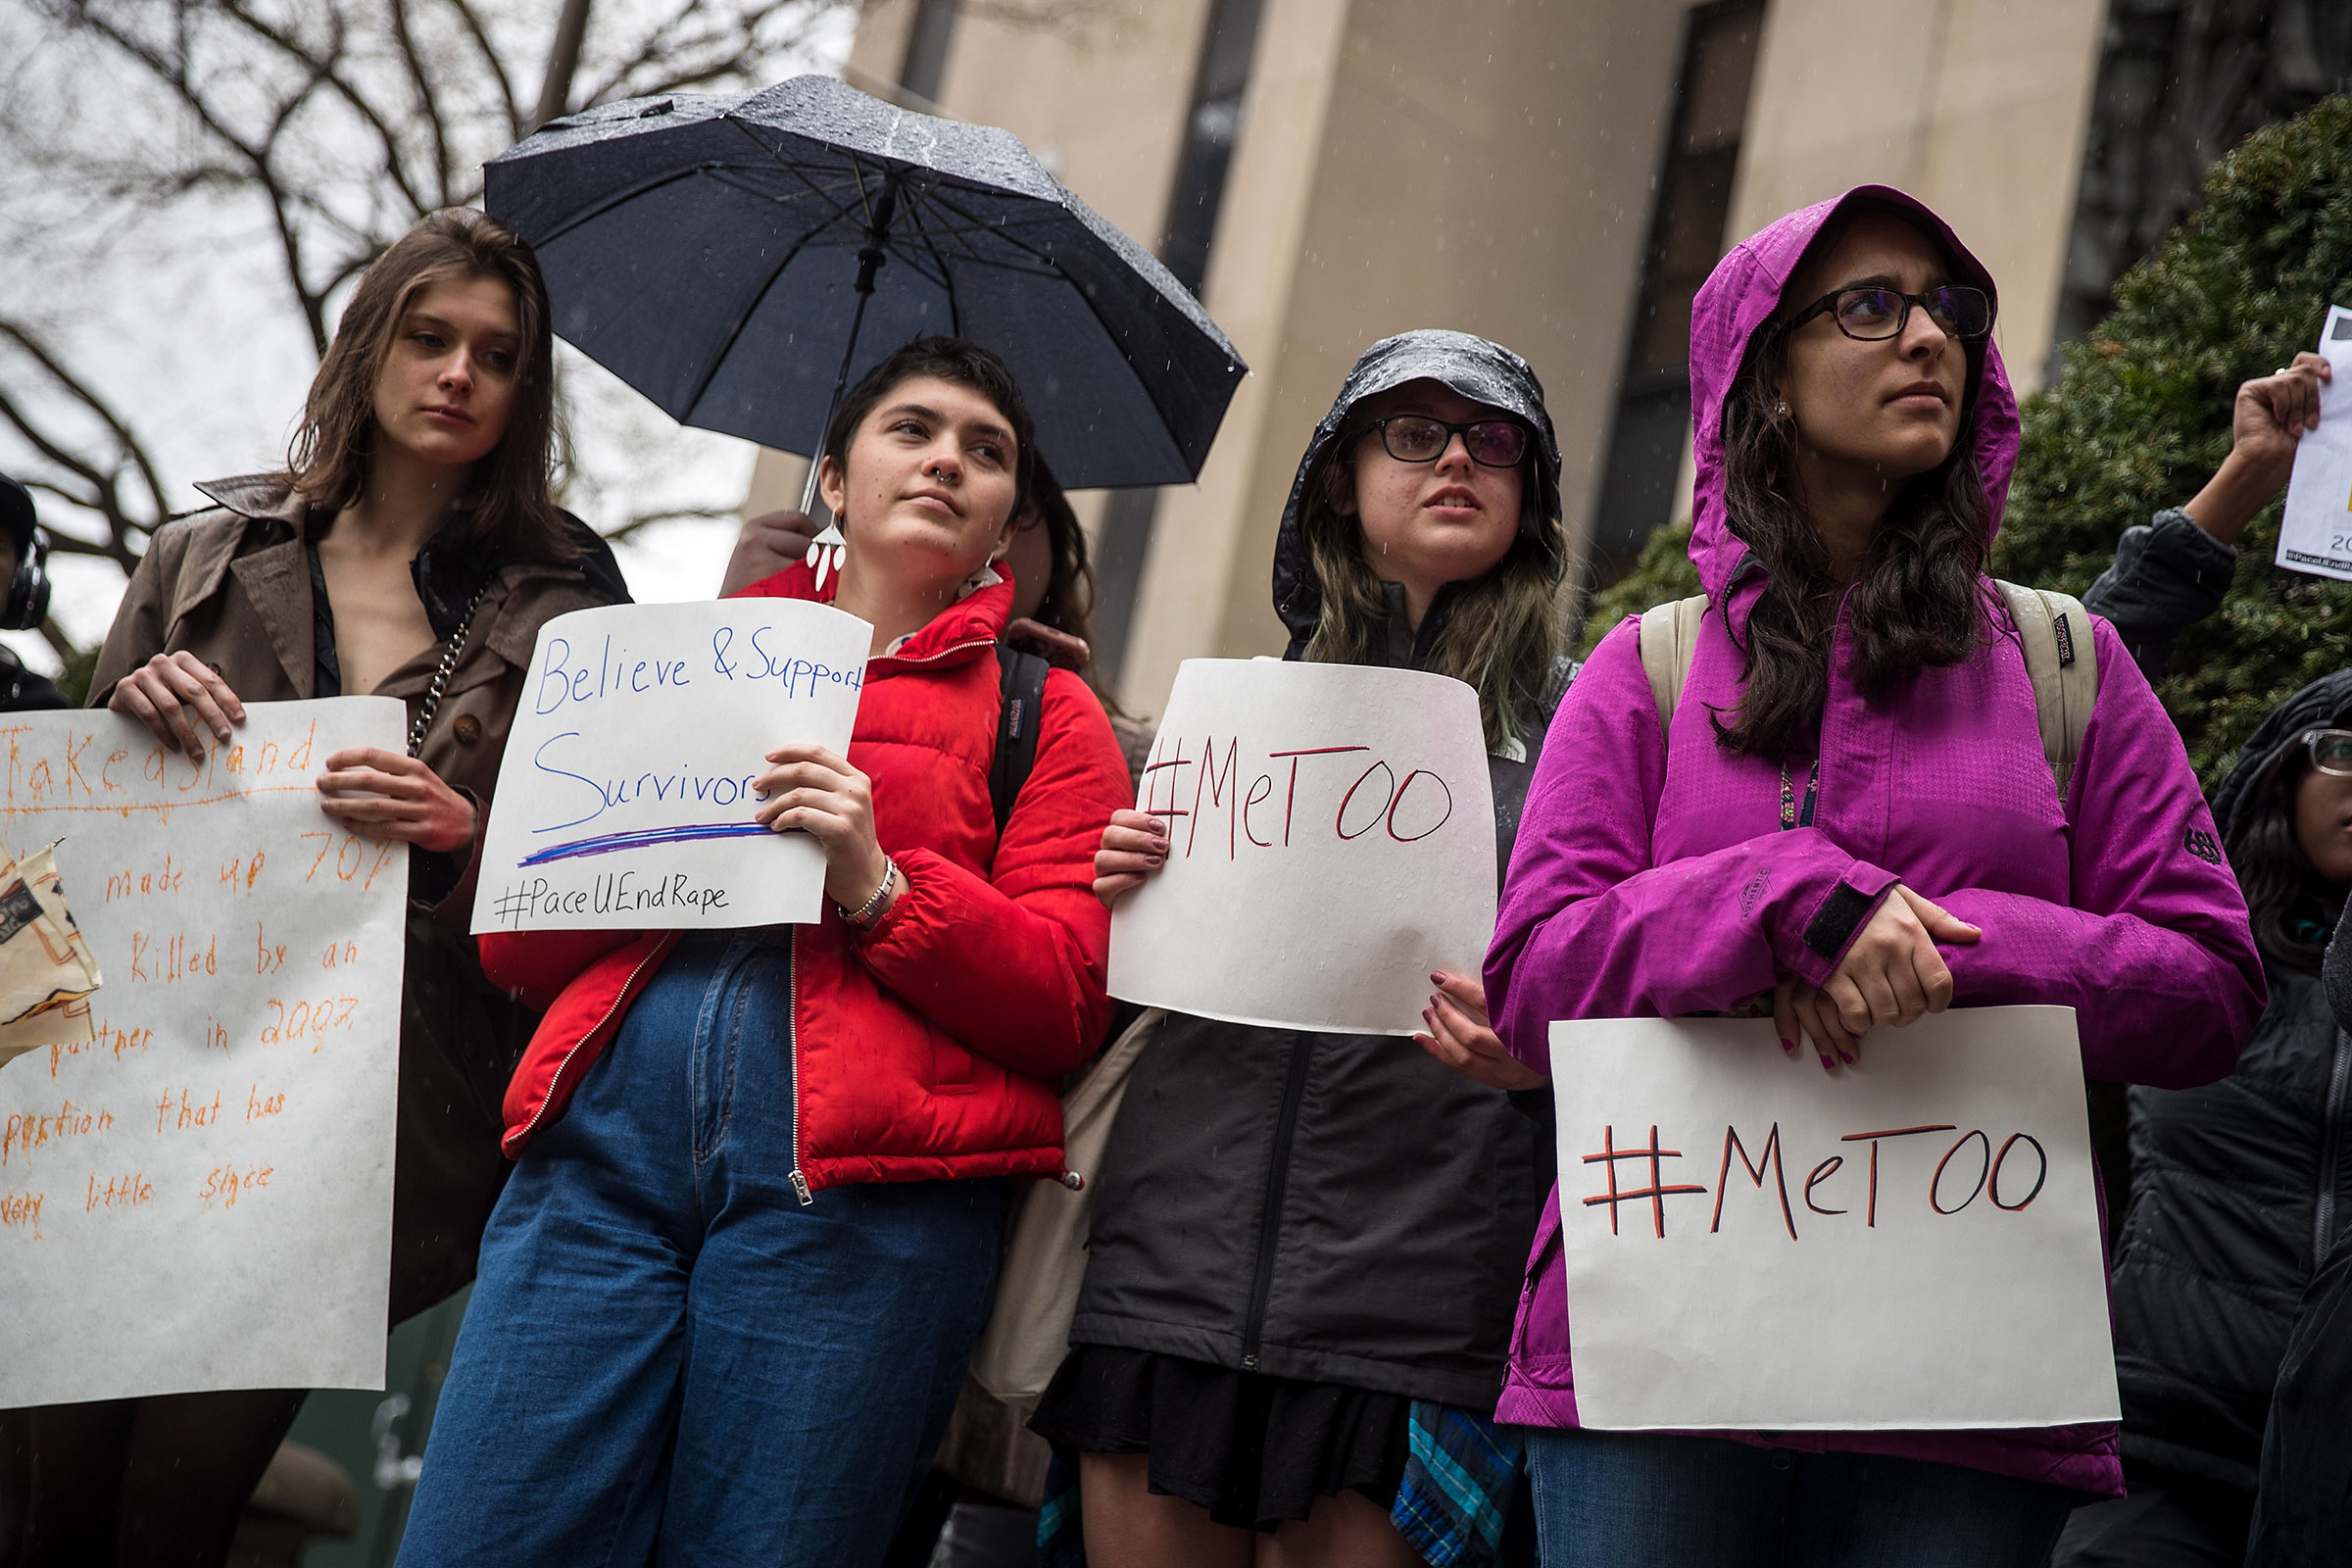 A small group of student activists from Pace University hold a rally against sexual violence after walking out of their classes on the campus of Pace University, on April 19, 2018 in New York City. (Drew Angerer—Getty Images)